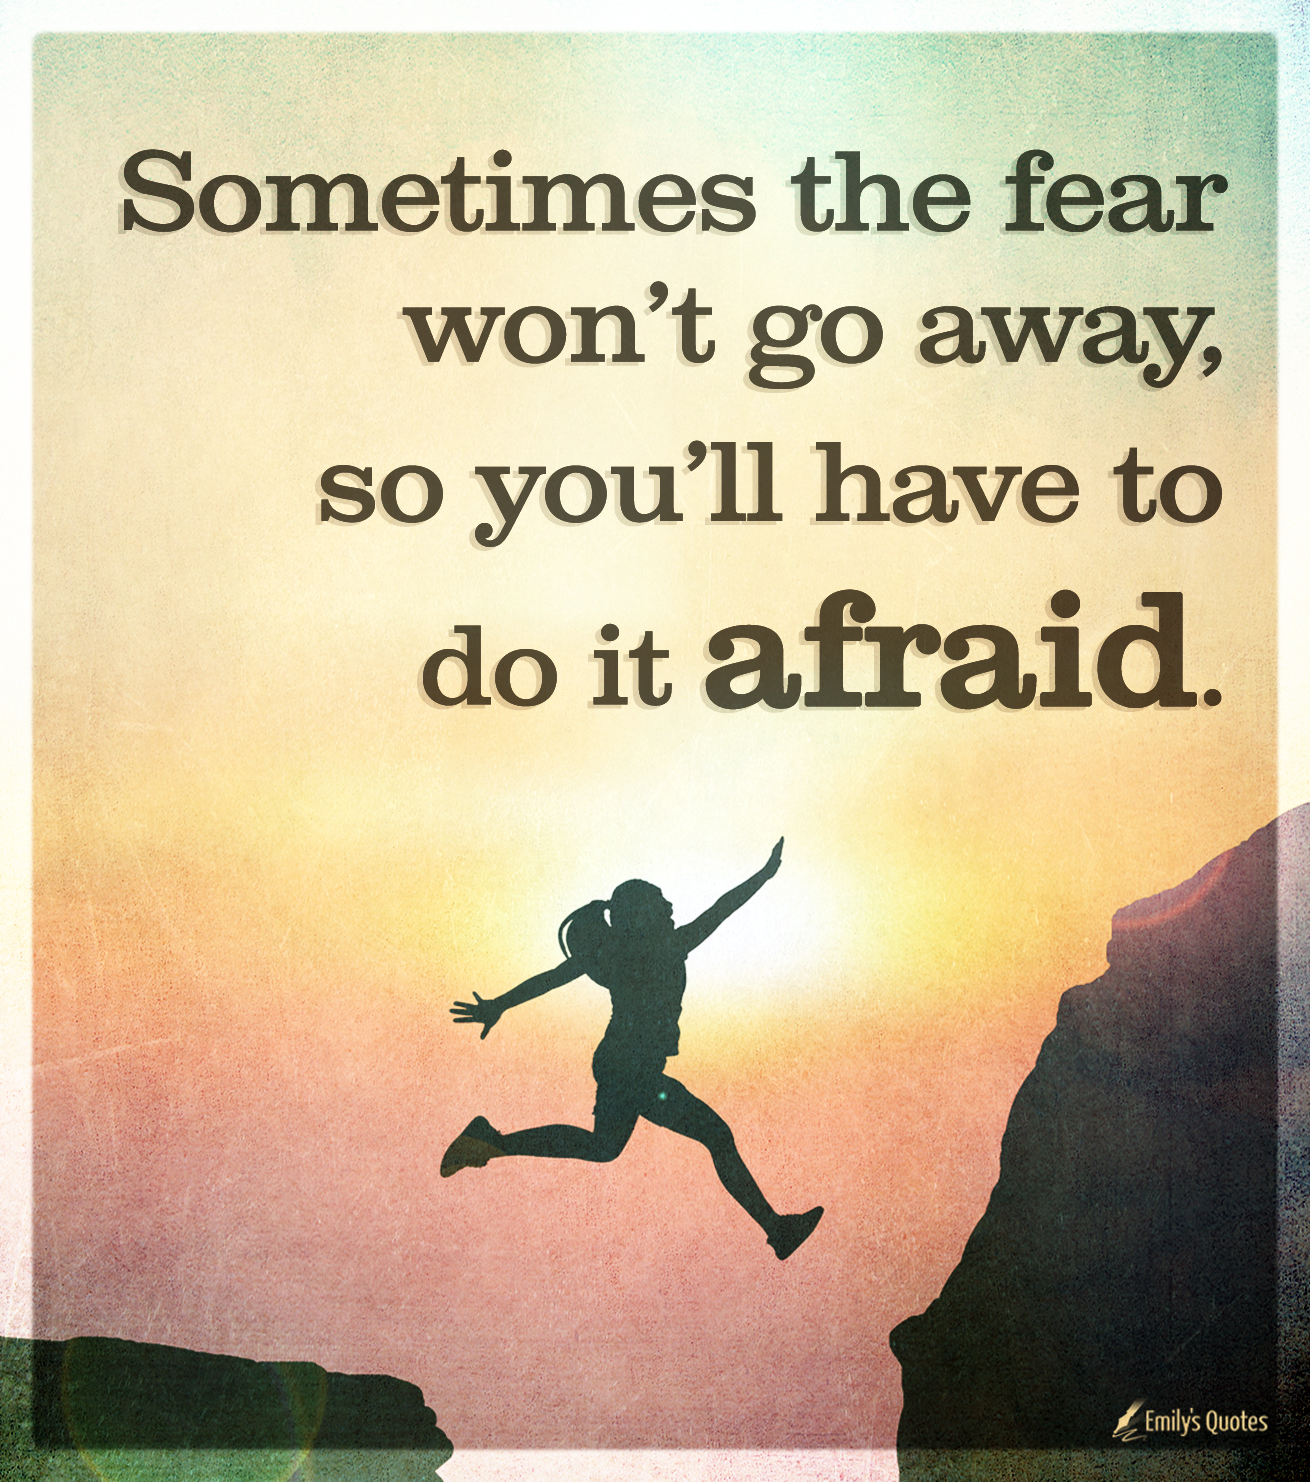 Sometimes the fear won’t go away, so you’ll have to do it afraid